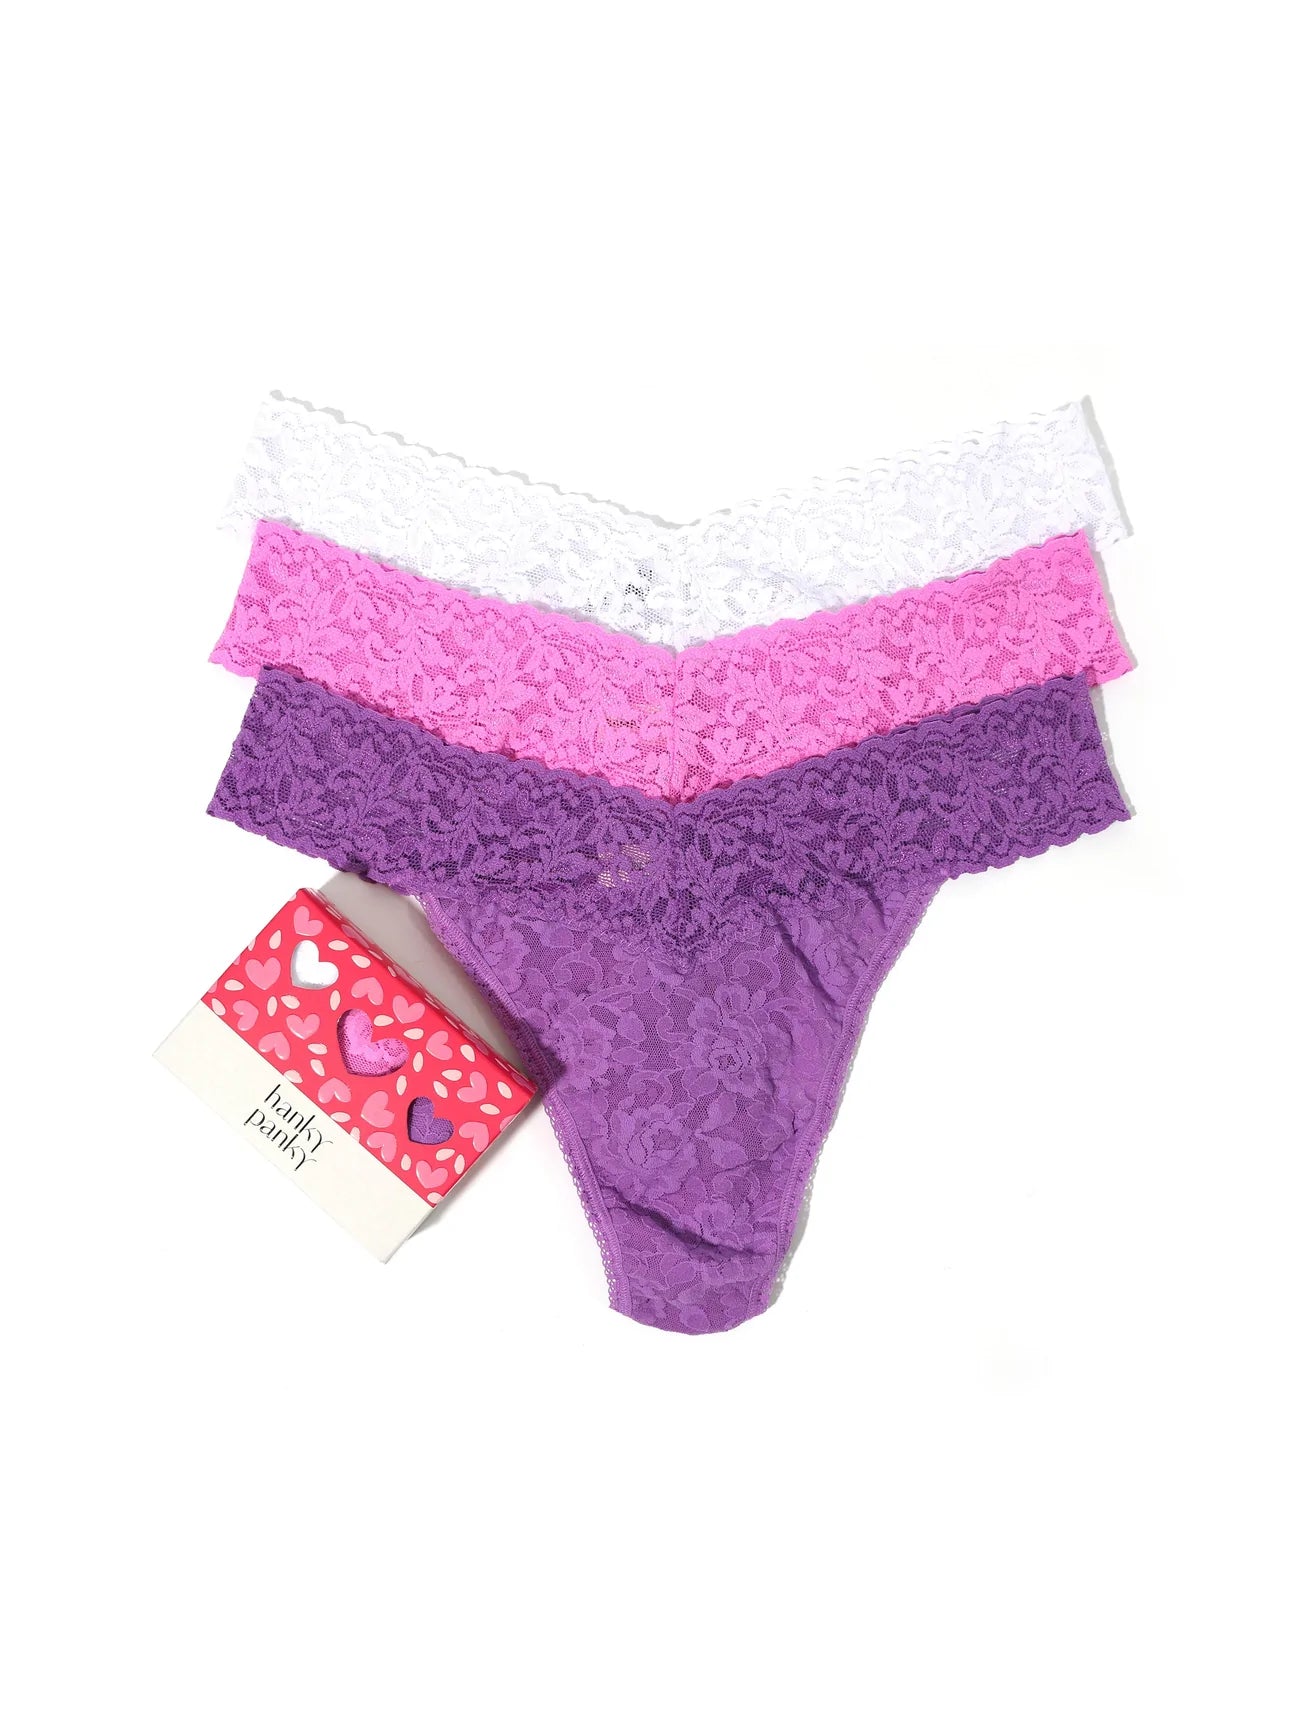 Hanky Panky Assorted 3-Pack Lace Original Rise Thongs